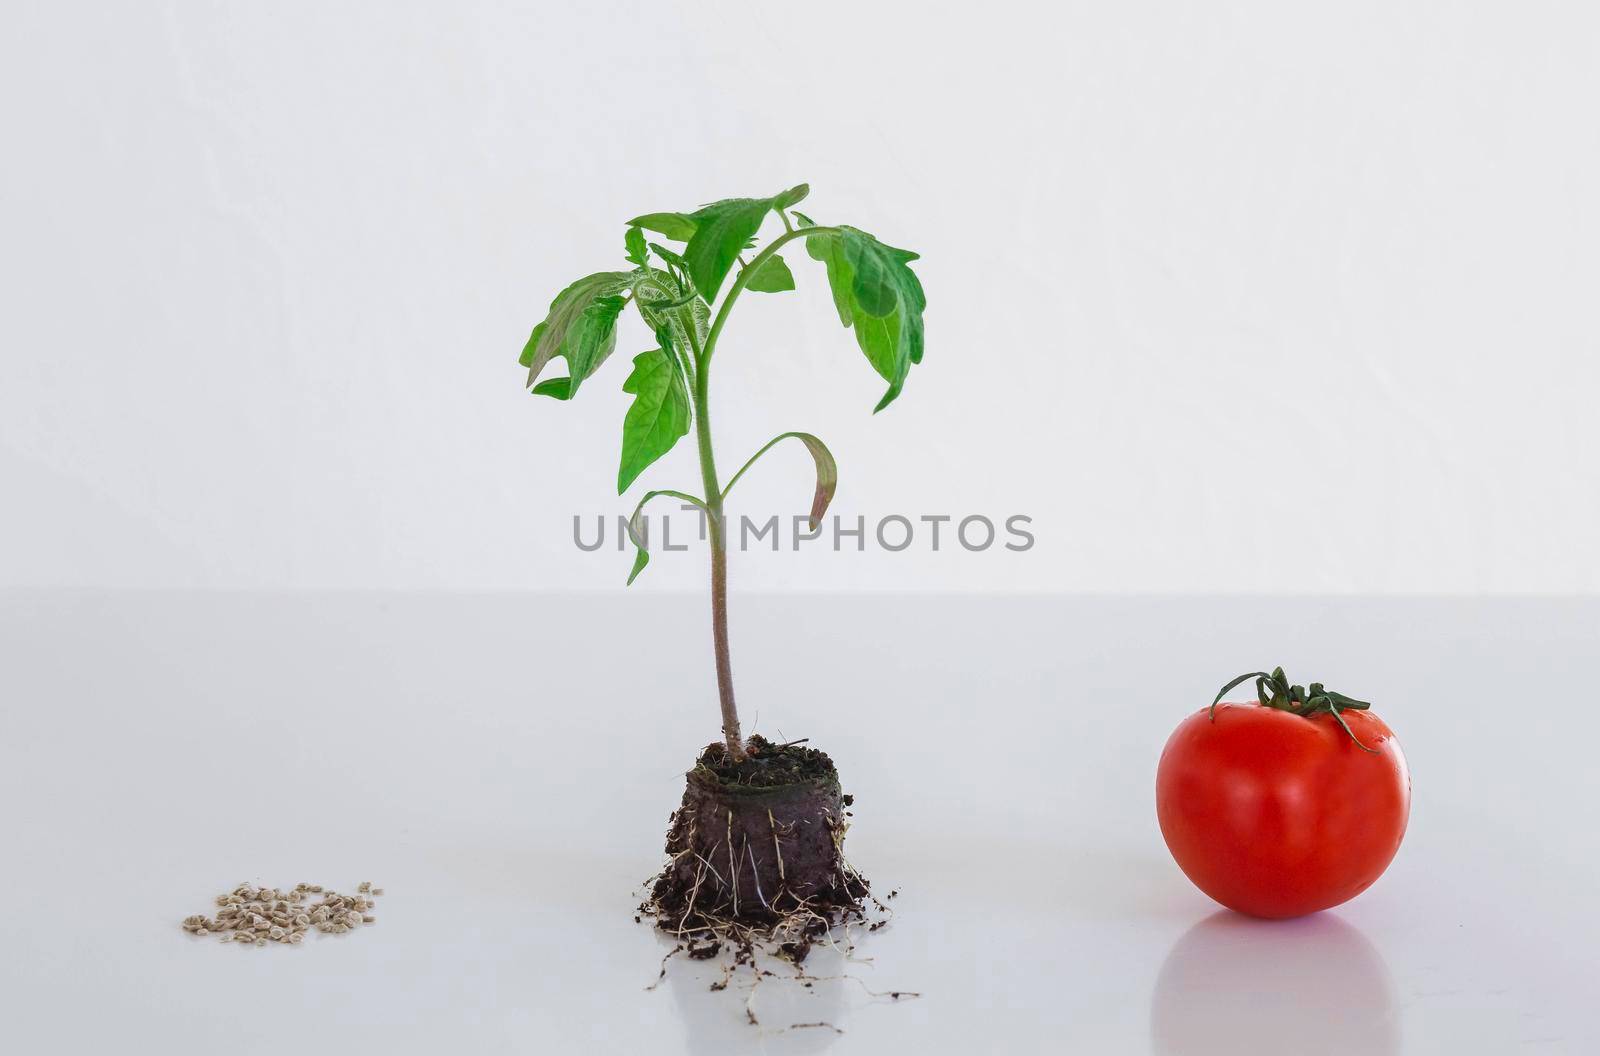 Tomato, seeds and sprout on white background.